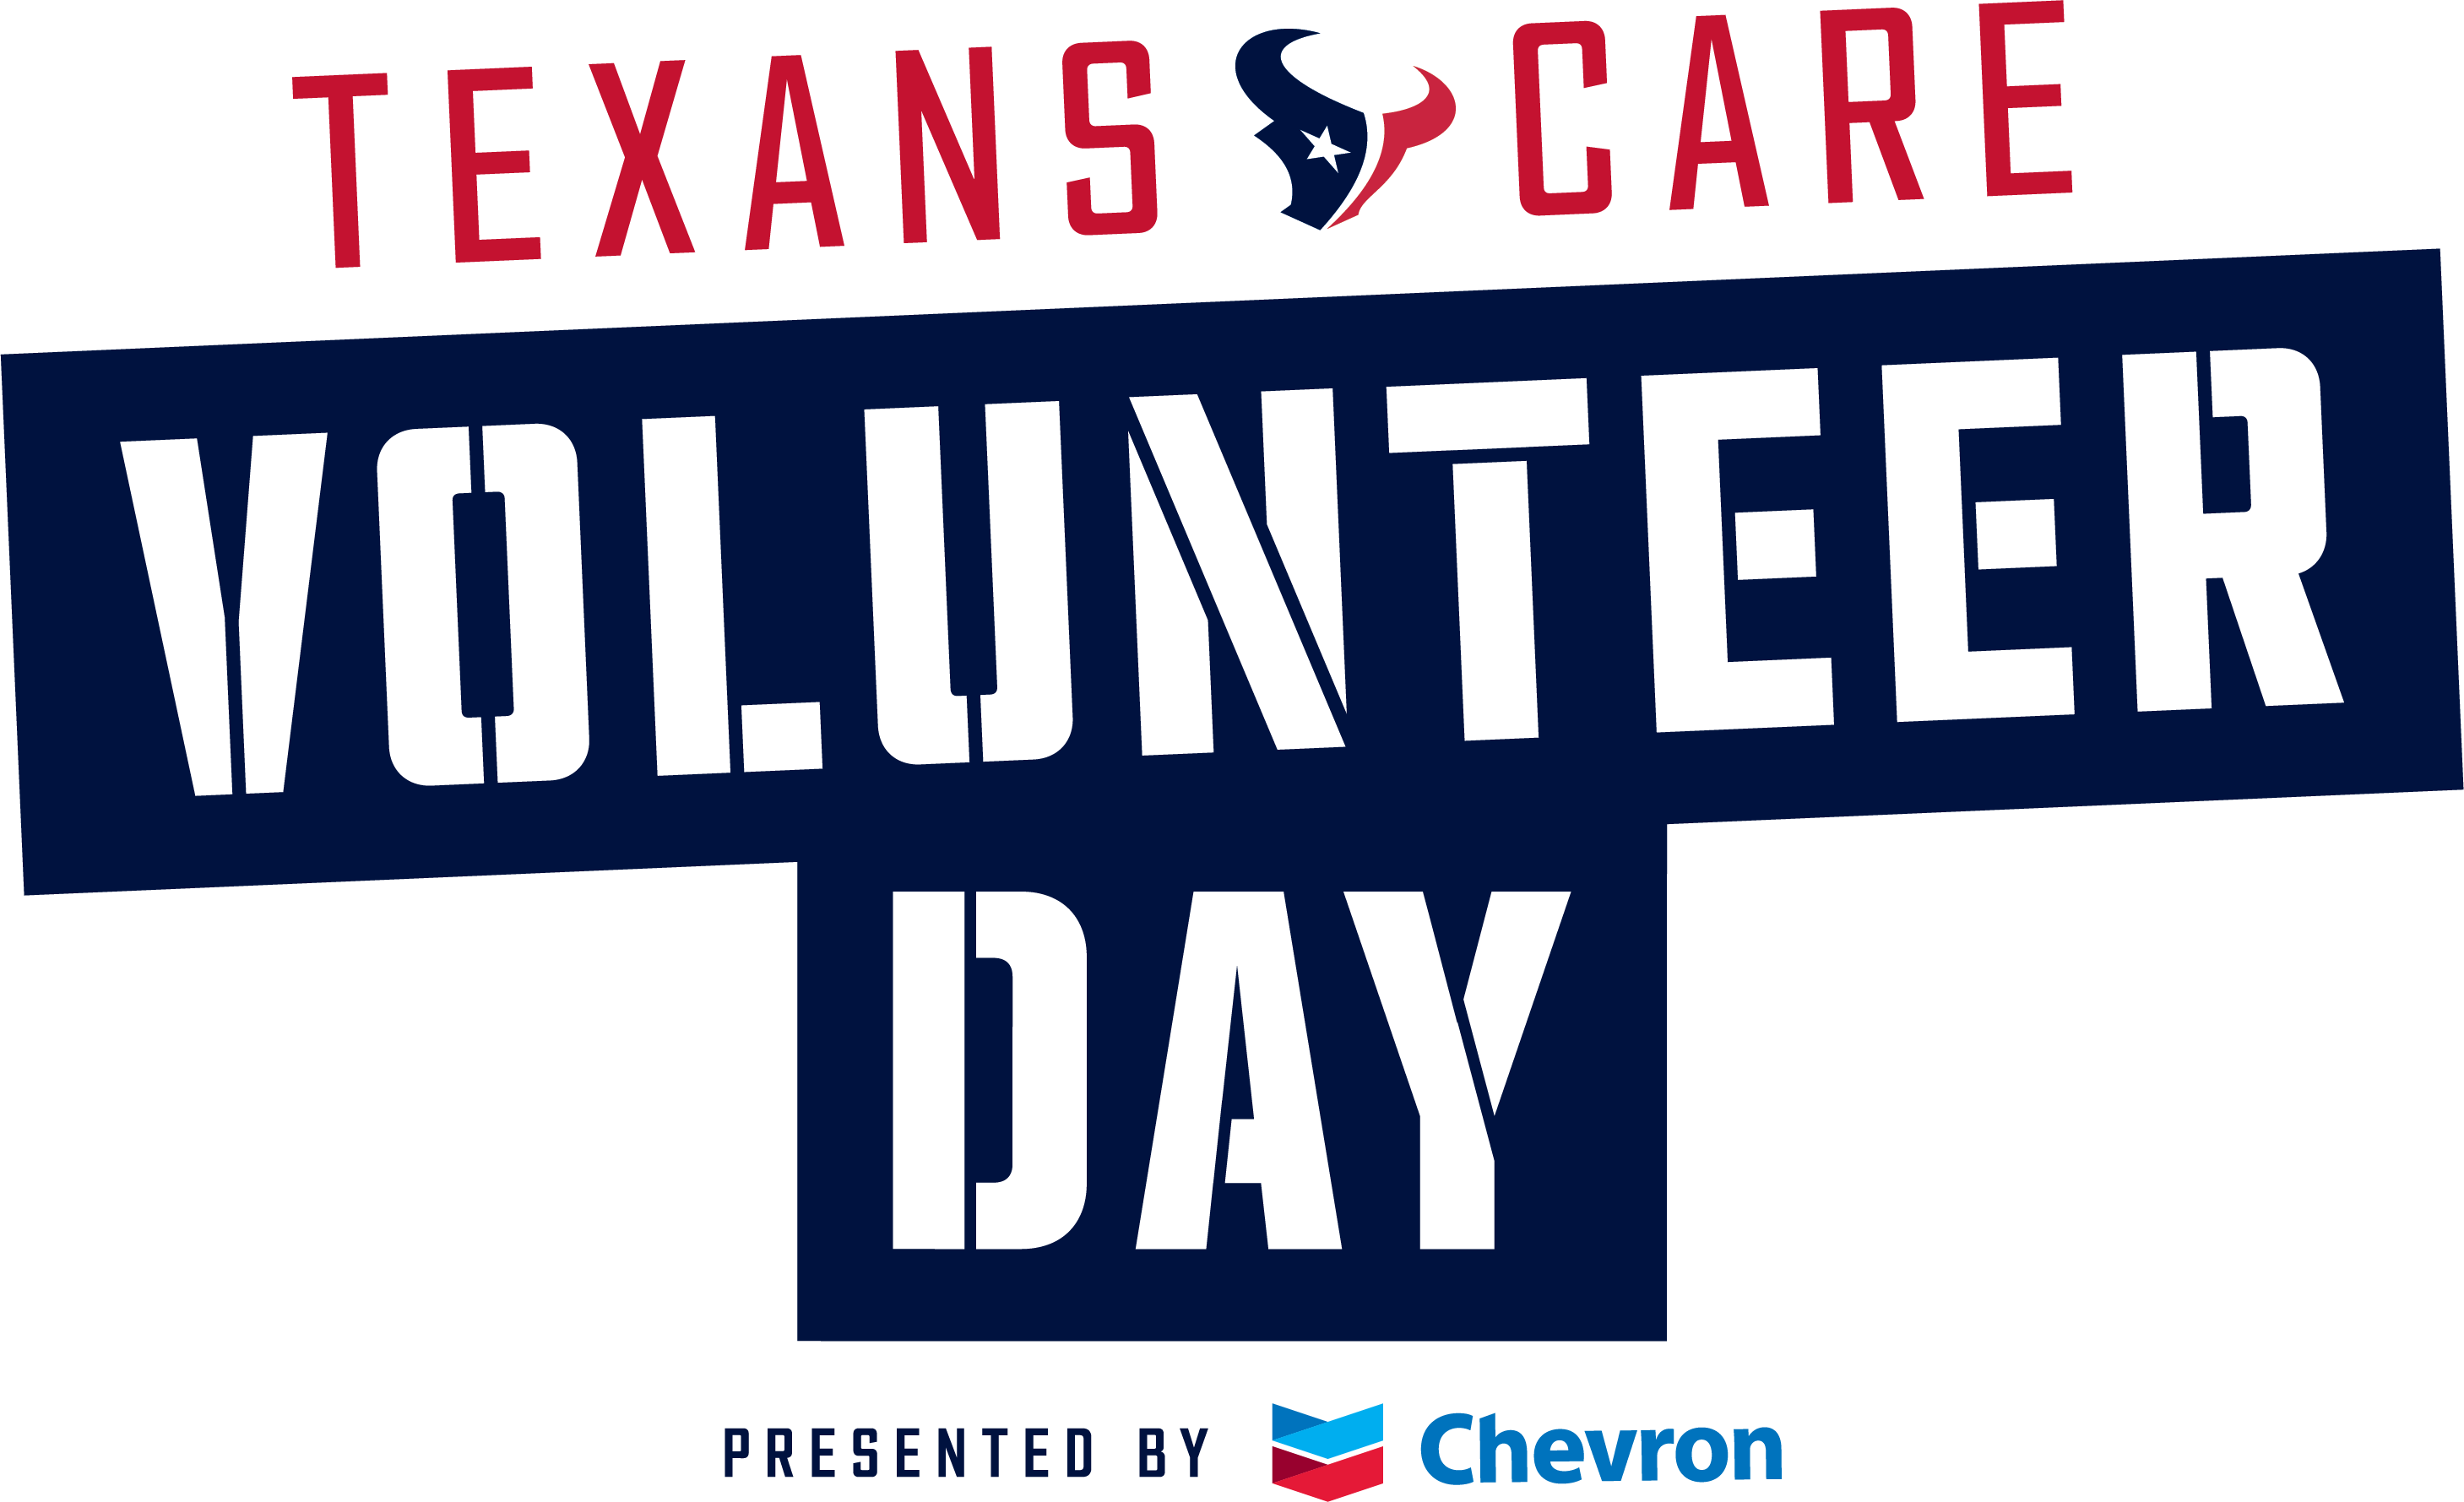 Texans Care Volunteer Day presented by Chevron